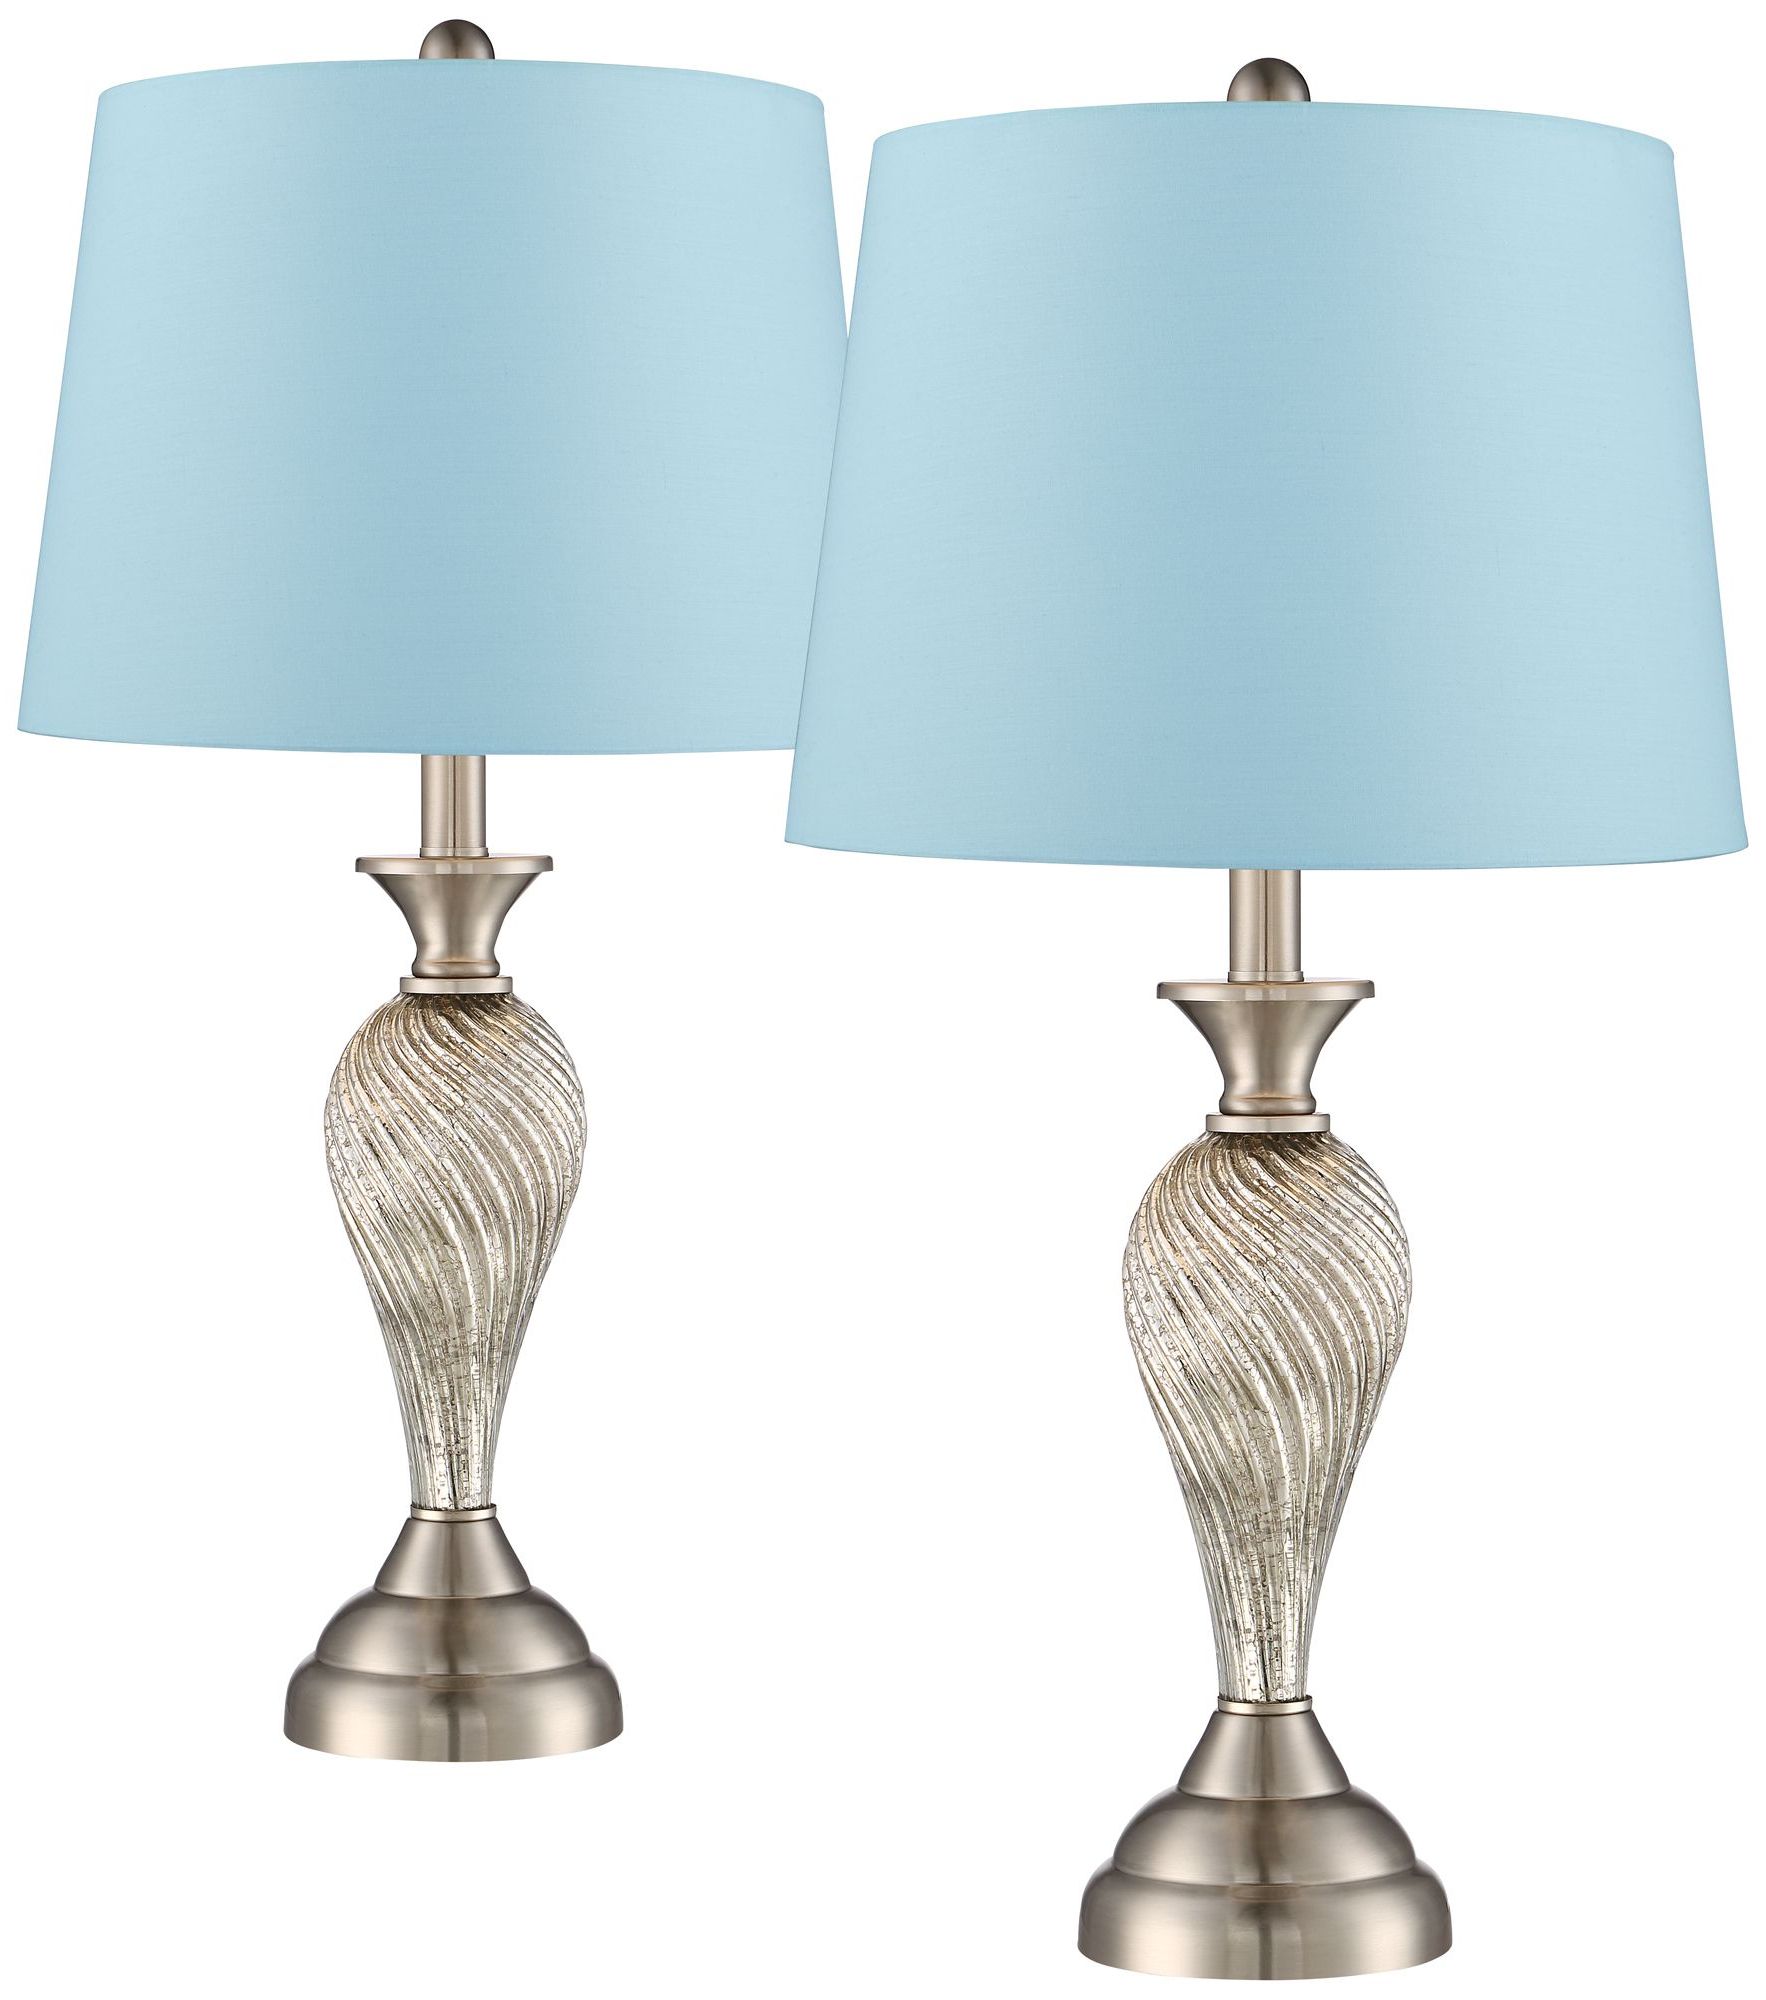 Regency Hill Coastal Table Lamps 25" High Set Of 2 Brushed Nickel Twisting  Glass Hardback Shade Living Room Bedroom House – Walmart Inside Latest Glass Satin Nickel Standing Lamps (View 10 of 15)